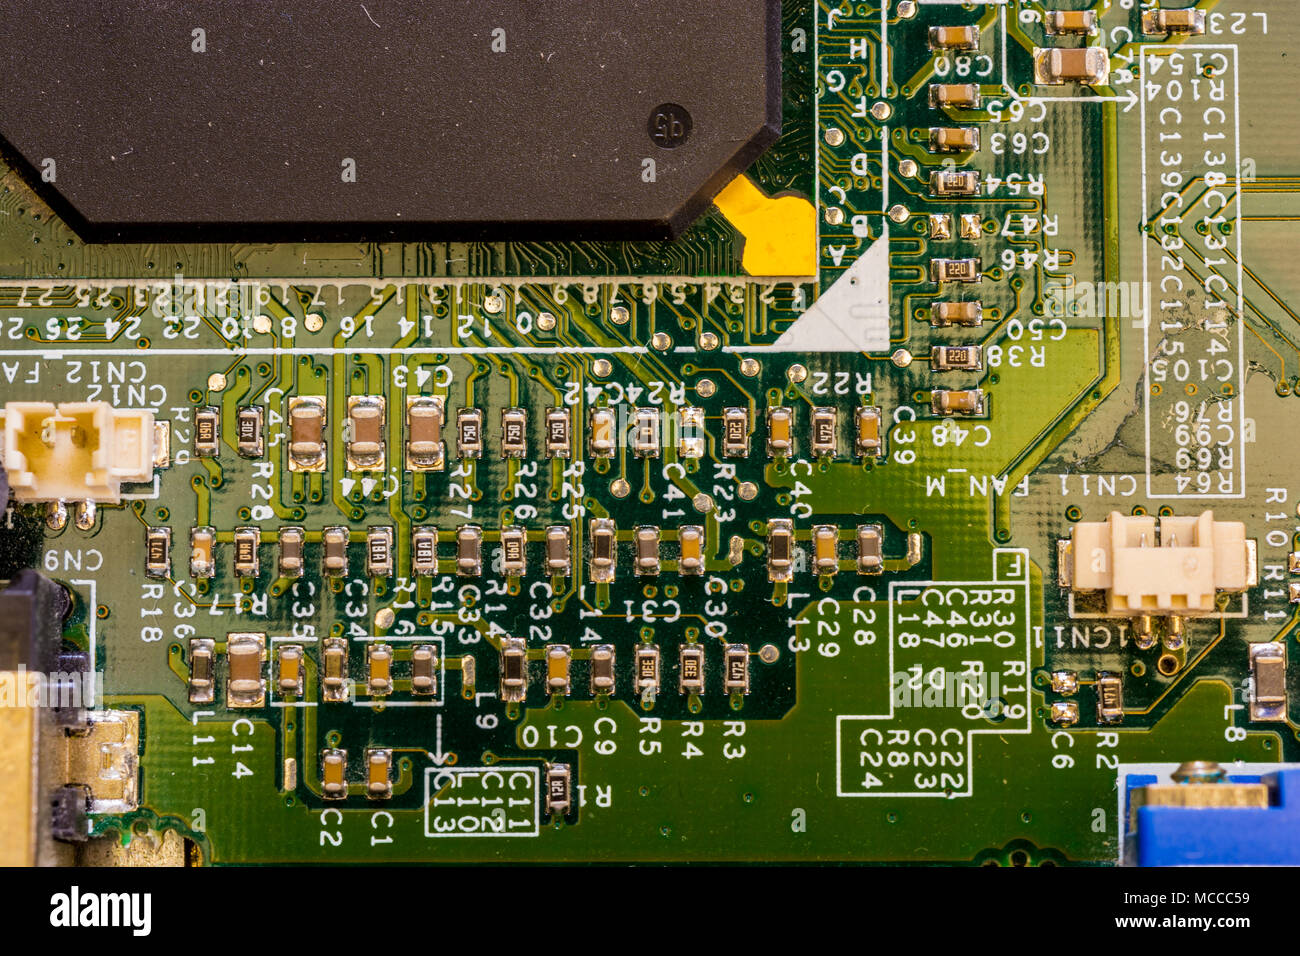 Close up view of motherboard showing main computer components and portals, microprocessors and intricate network of connections Stock Photo